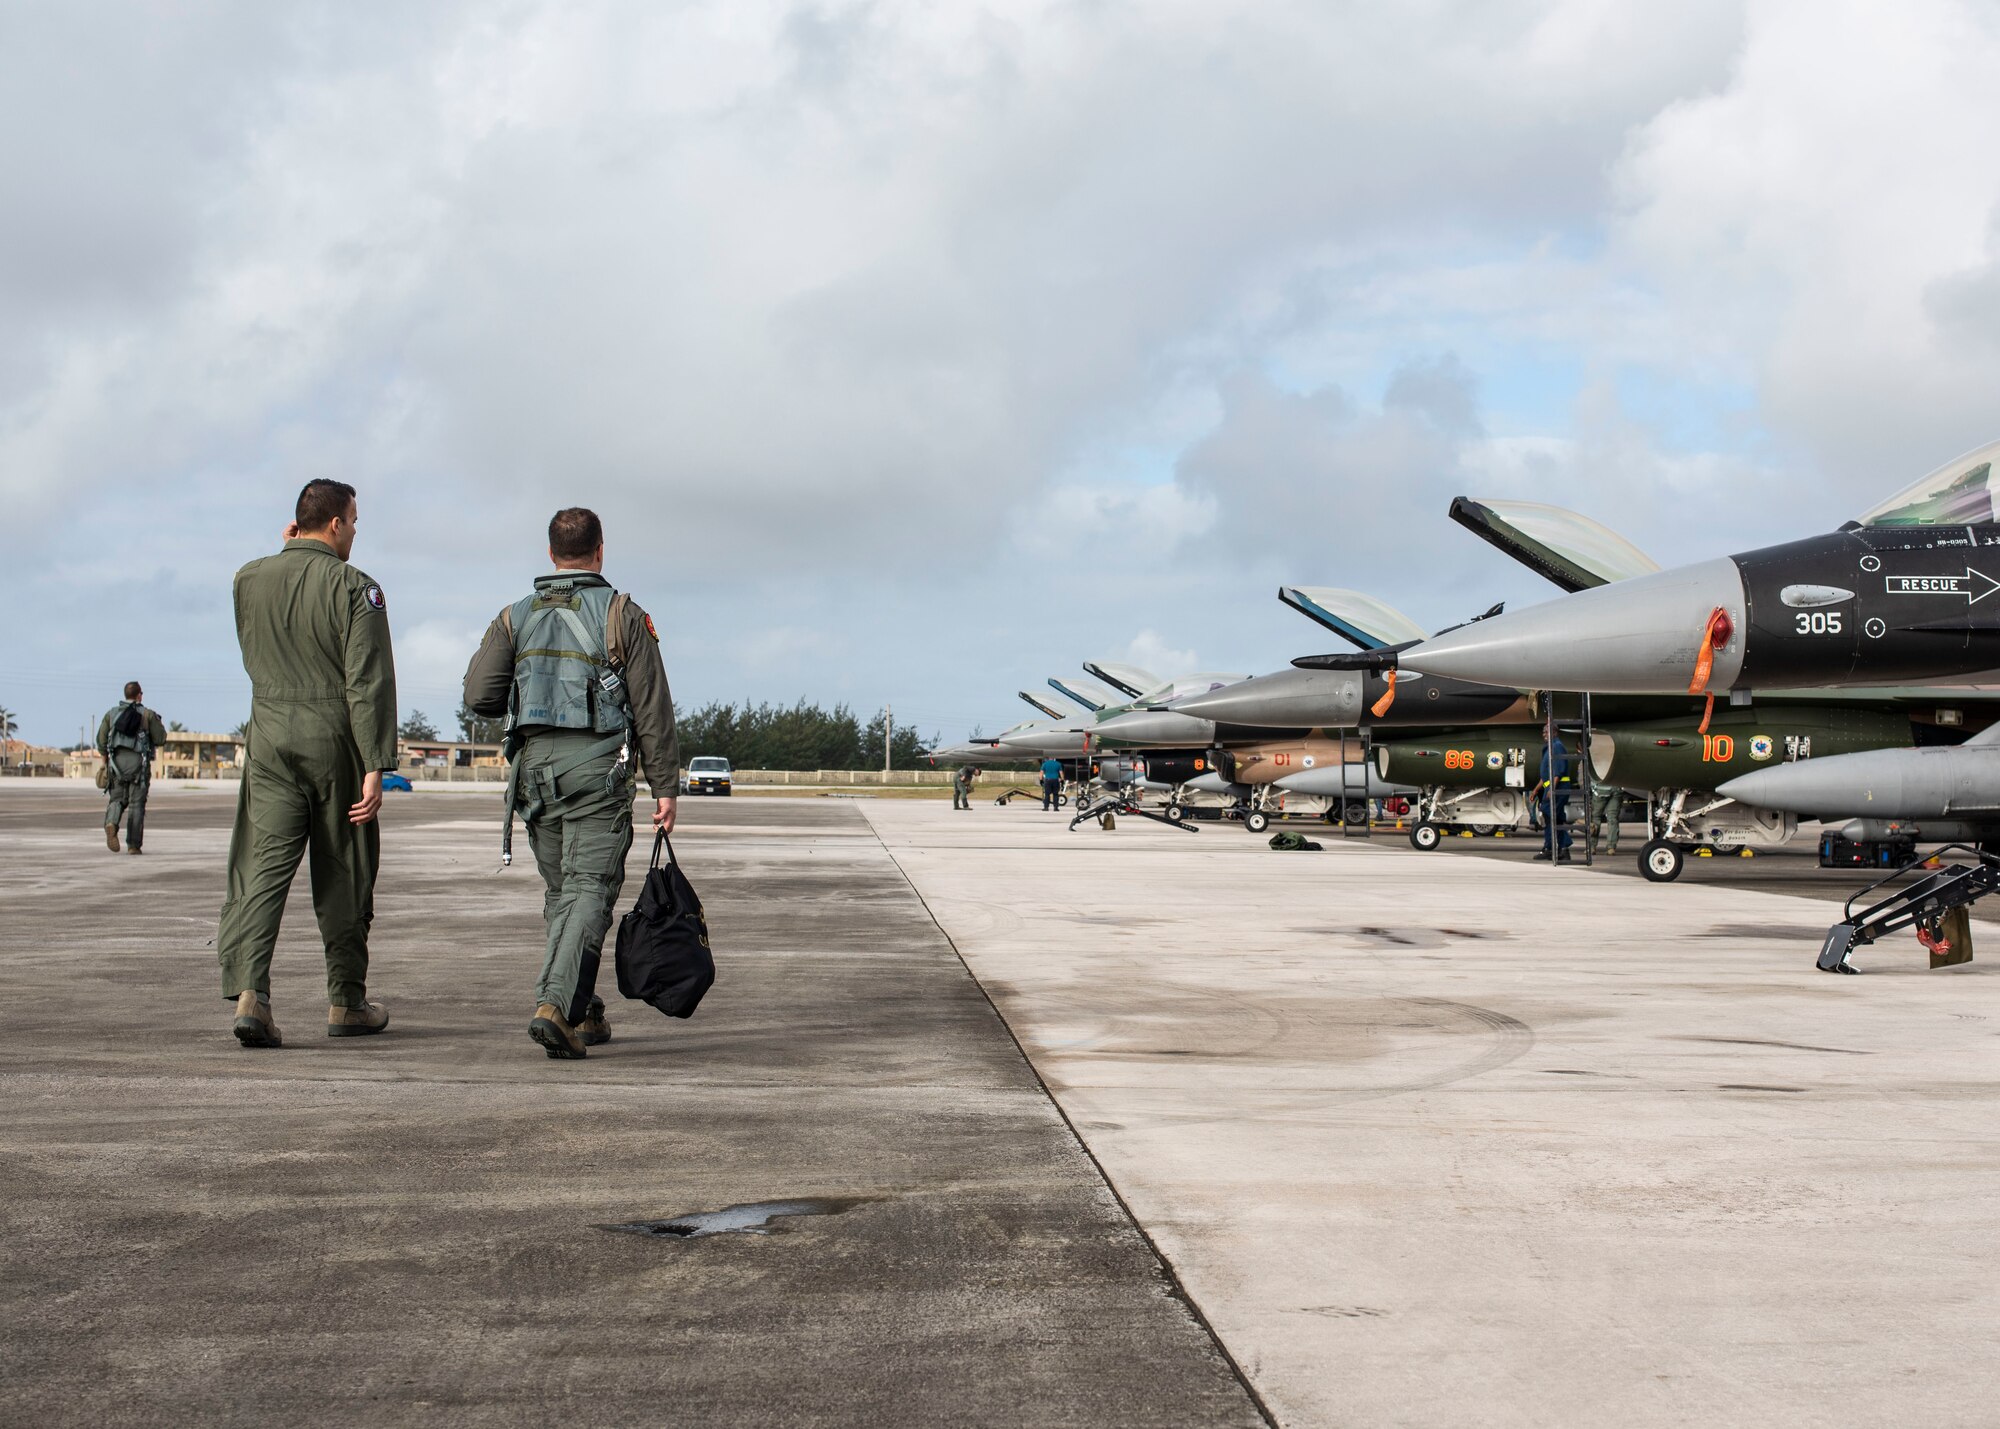 Lt. Col. Julio Rodriguez (right), an 18th Agressor Squadron pilot, and his brother Lt. Col. Antonio Rodriguez (left), a 506th Expeditionary Air Refueling Squadron pilot, walk to an F-16C Fighting Falcon February 27, 2020 at Andersen Air Force Base, Guam.